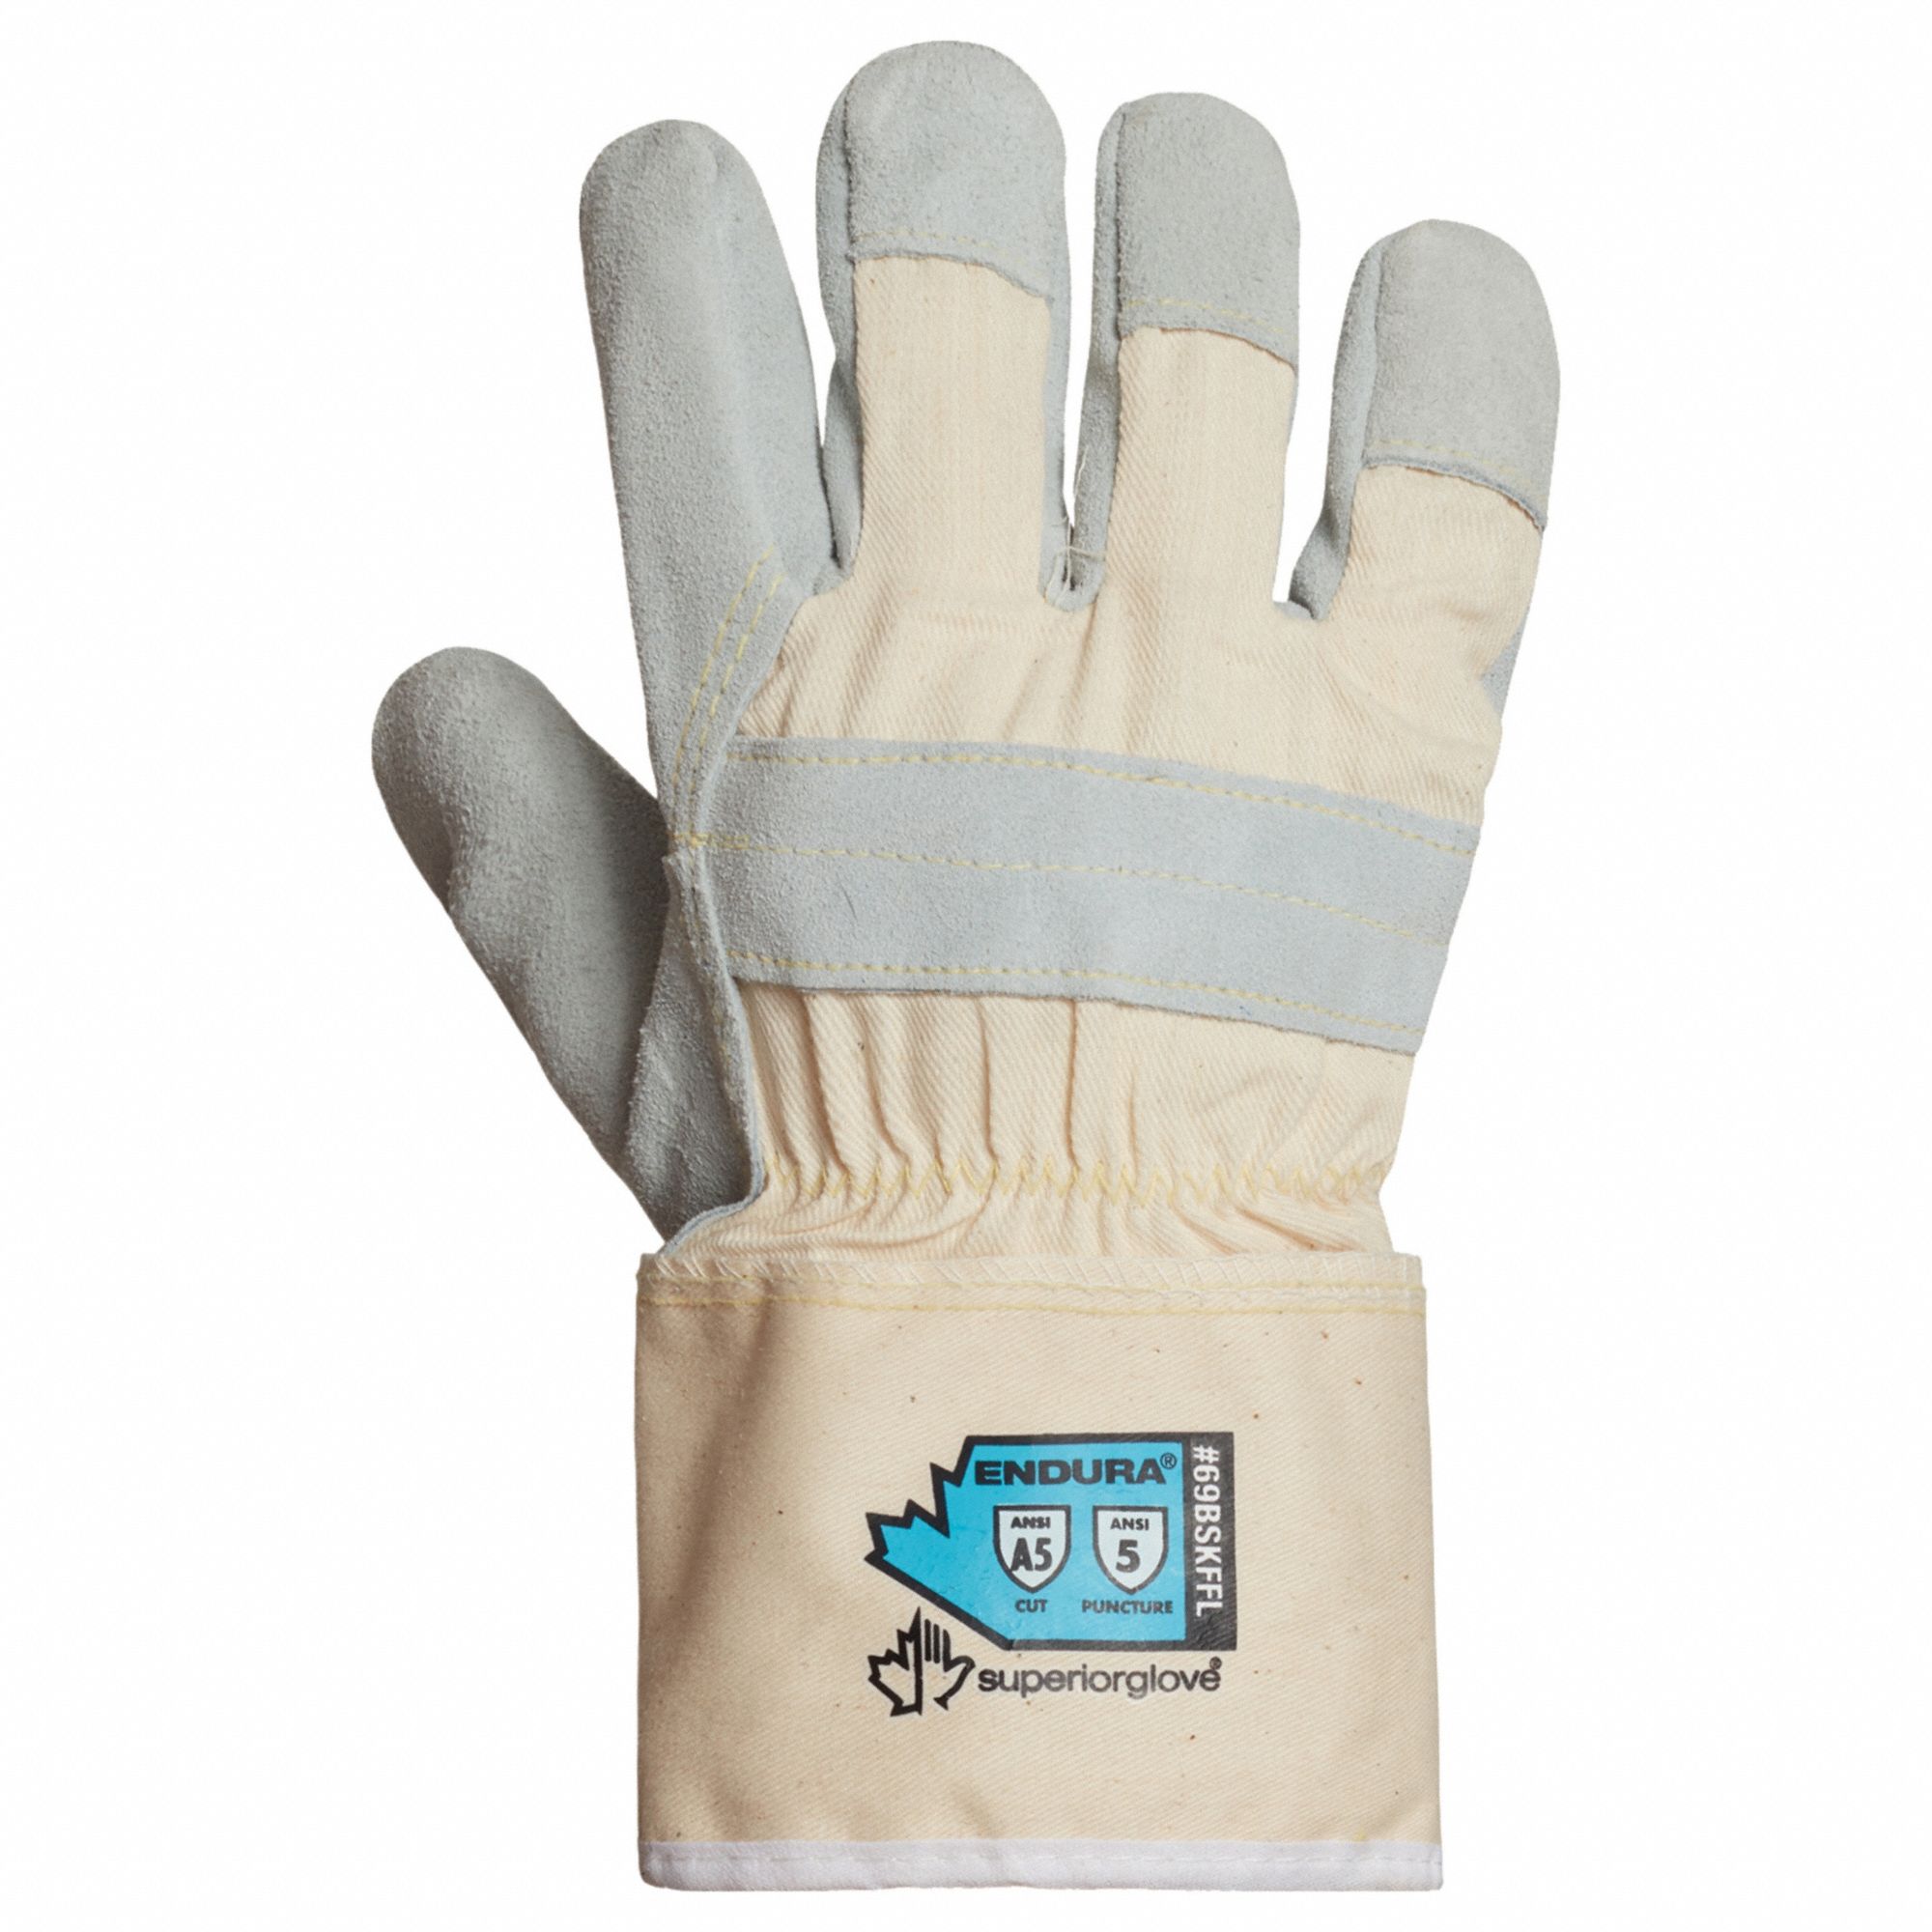 Top ANSI Rated Puncture Resistant Gloves